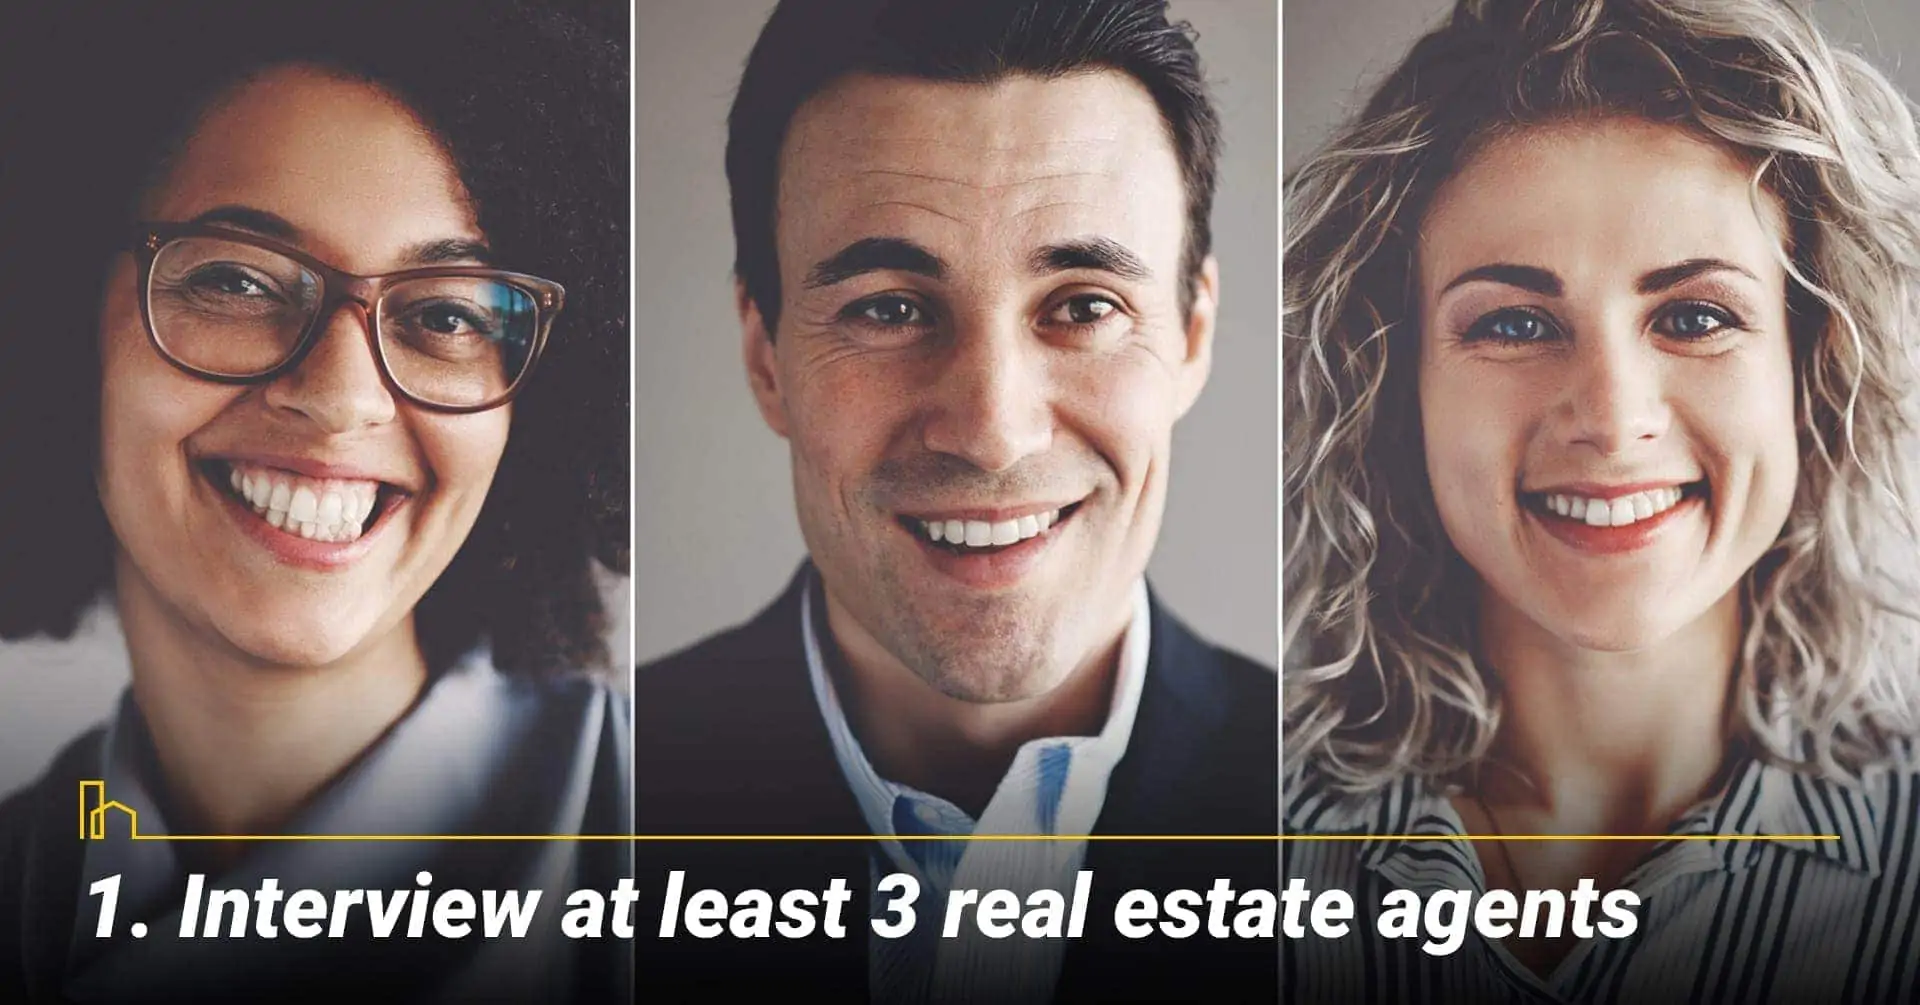 Interview at least 3 real estate agents, select your agent carefully